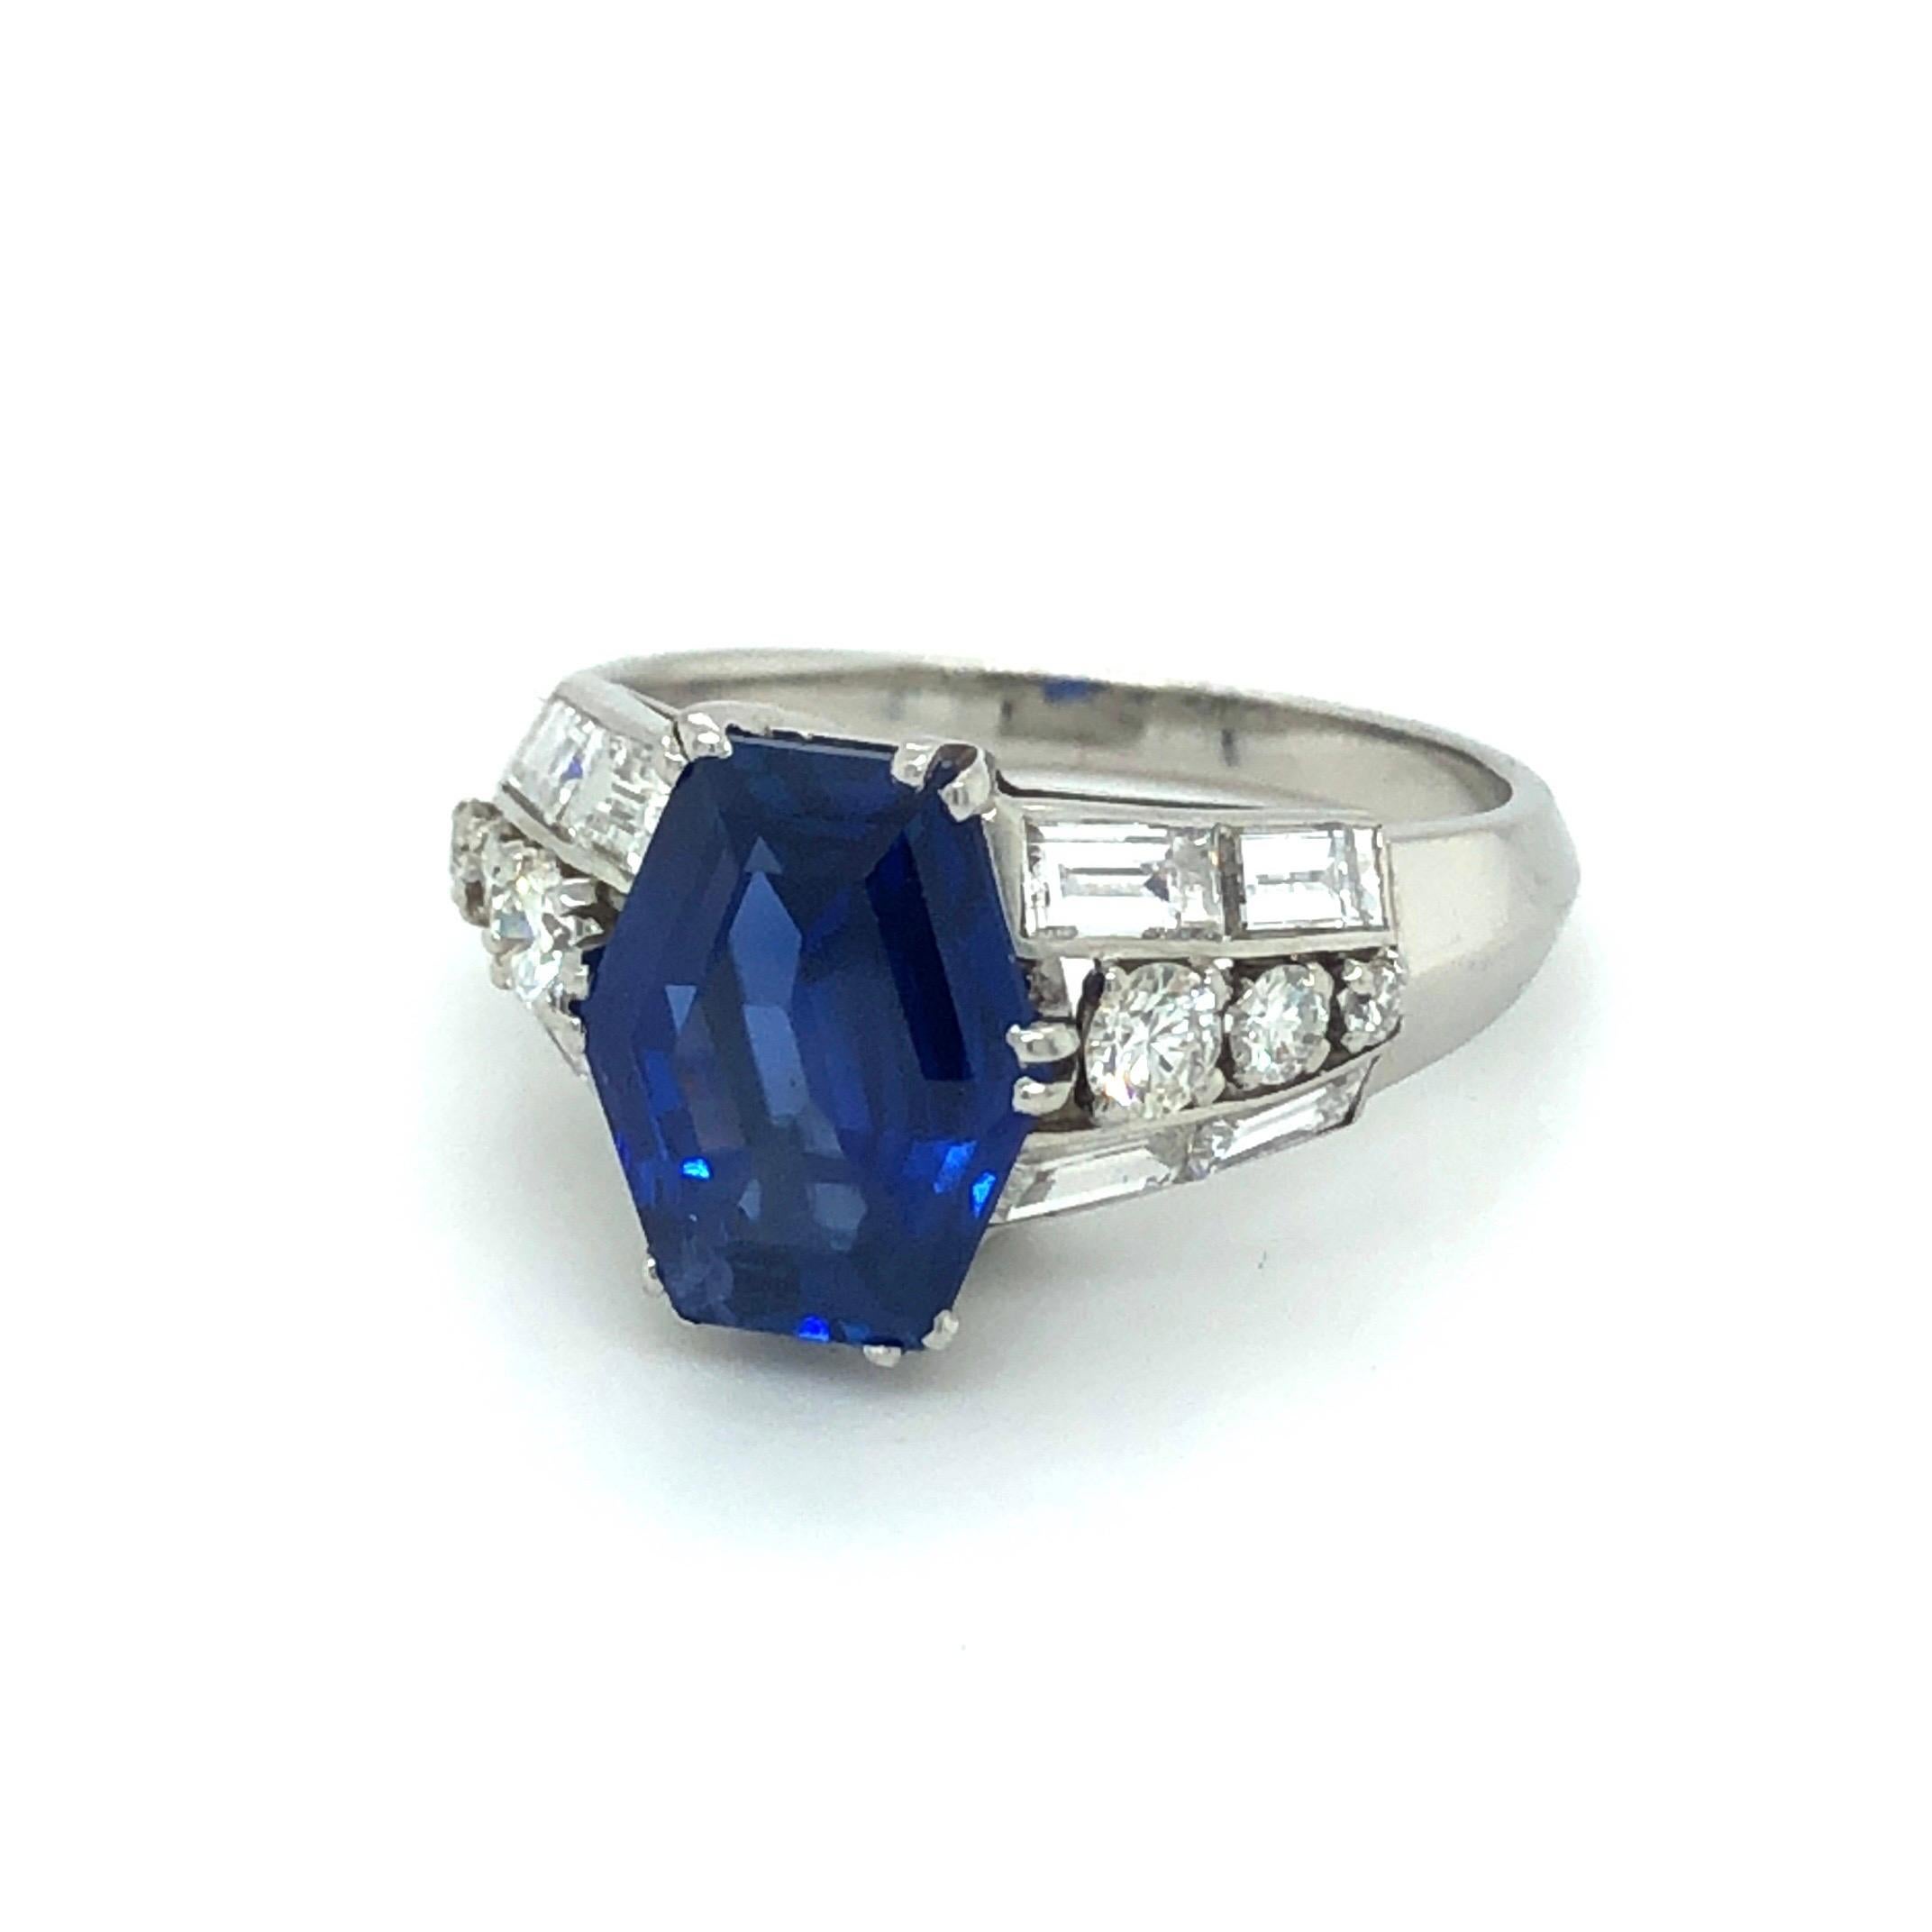 Splendid Burma sapphire and diamond platinum dress ring.
Crafted in platinum 950 and centered by a beautiful hexagonal natural Burmese sapphire of approximately 4.9 carats flanked by 8 diamond-baguettes and 6 brilliant-cut diamonds totalling about